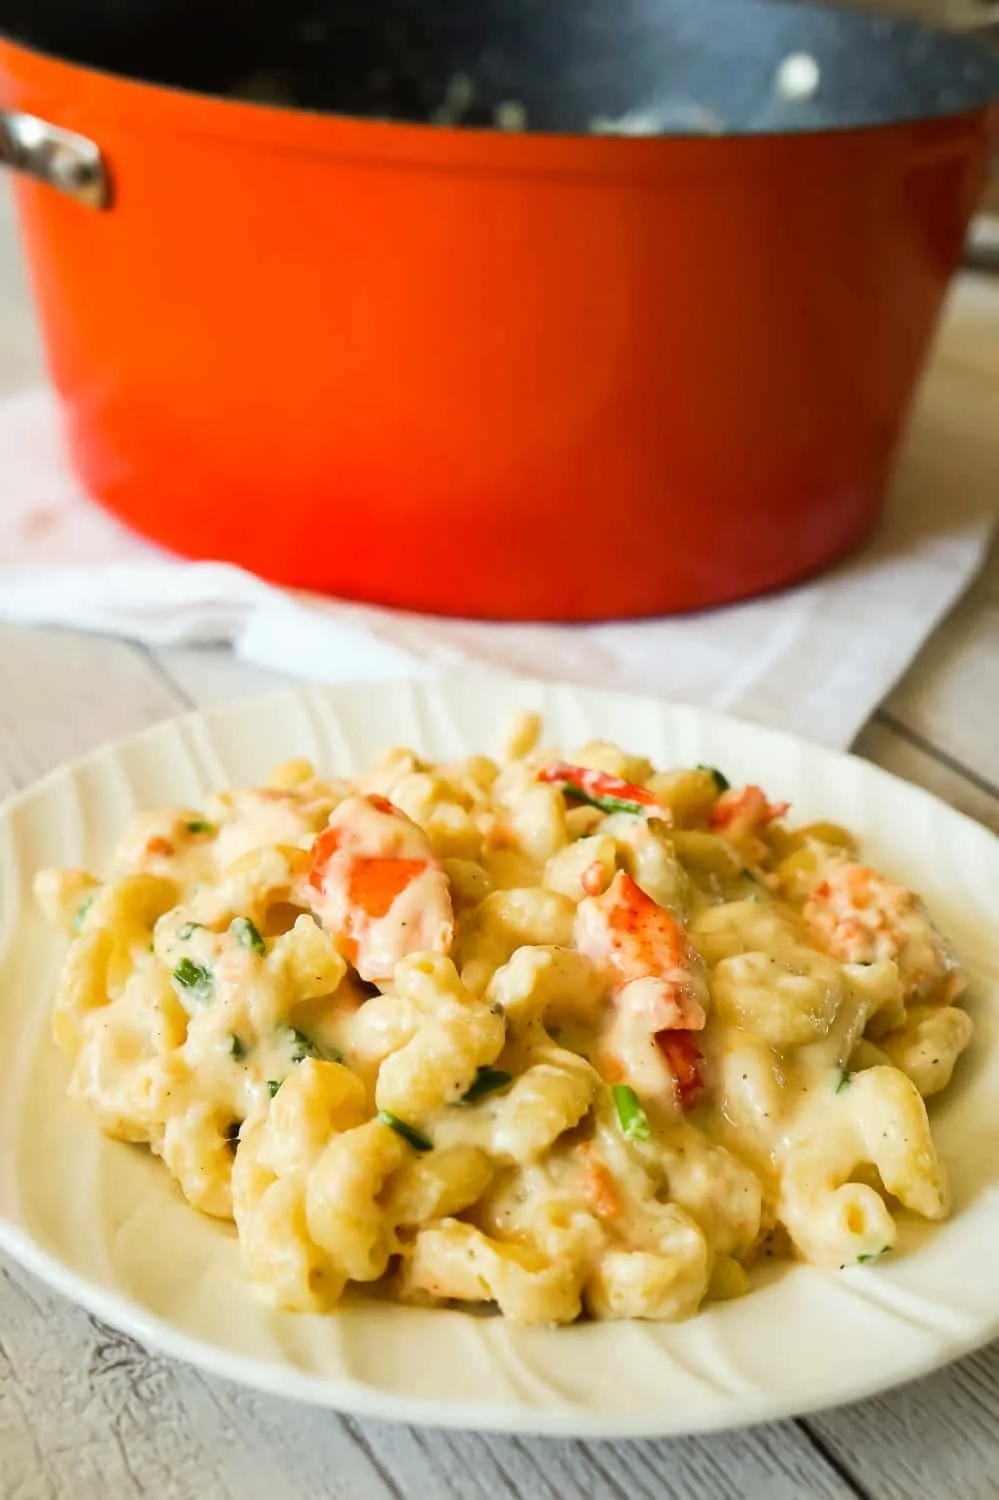 Lobster Mac and Cheese is a delicious seafood pasta recipe made with chunks of precooked lobster, mozzarella, cheddar and Swiss cheese.